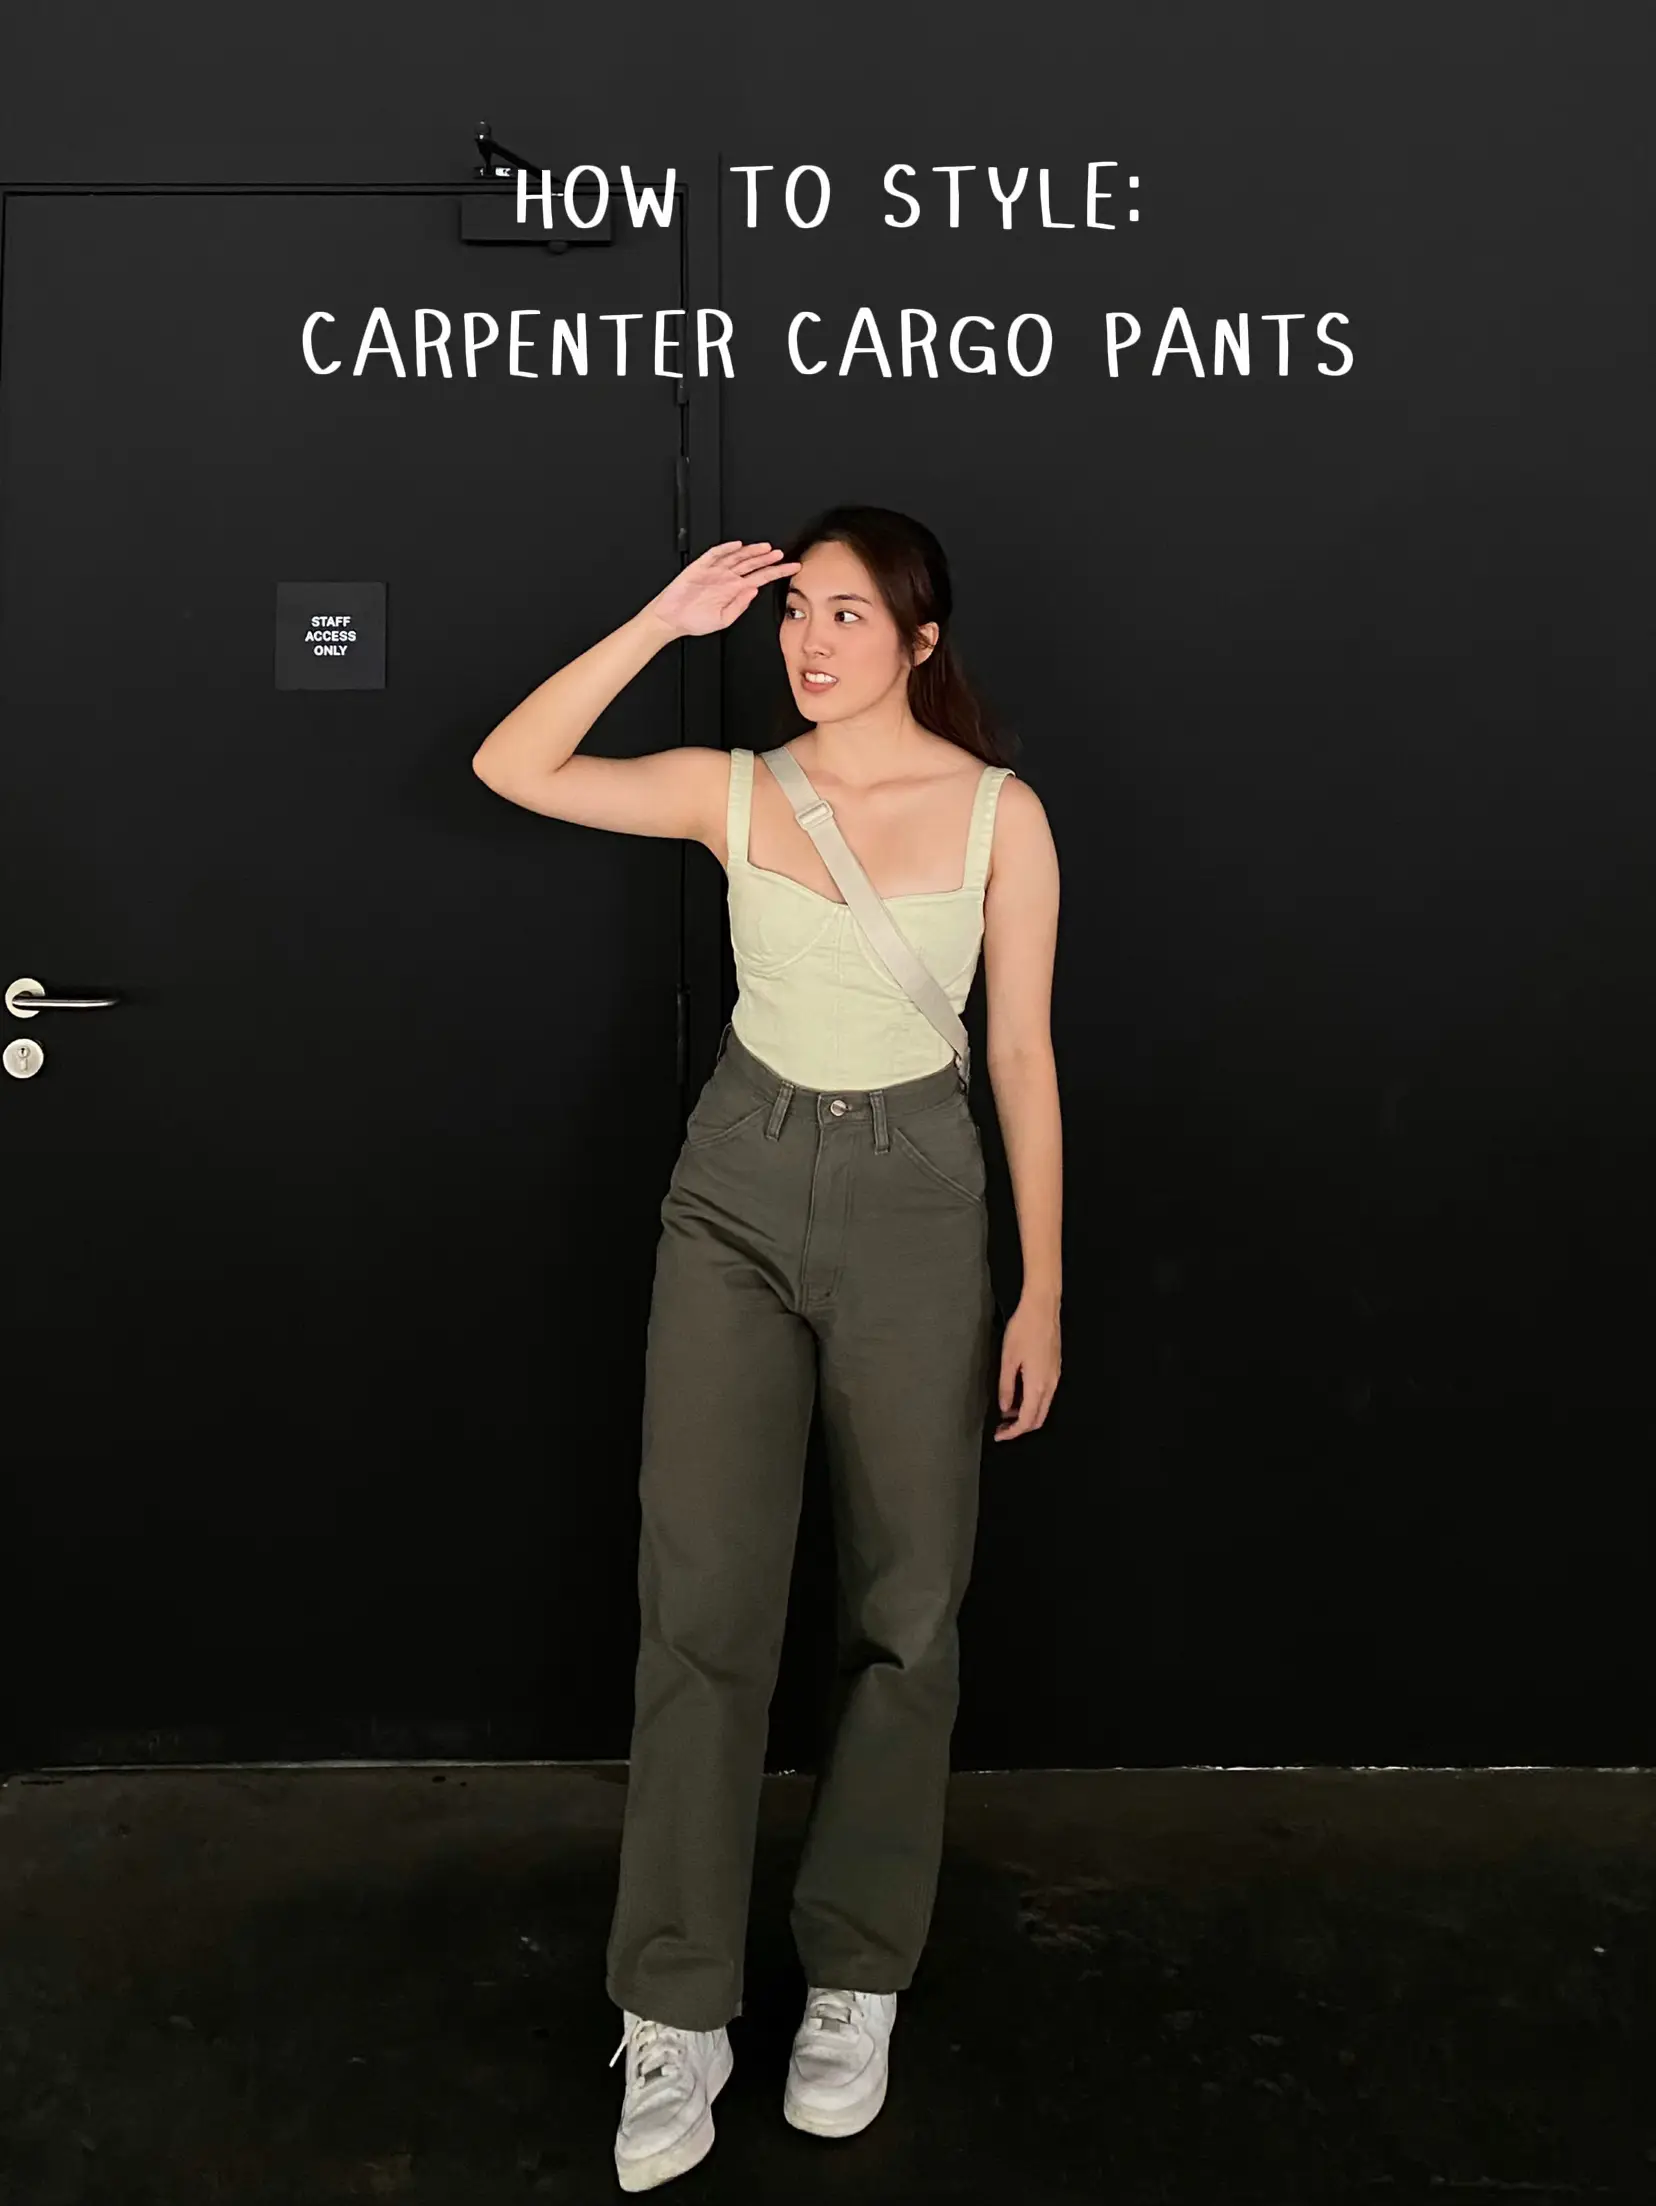 HOW TO STYLE: carpenter cargo pants, Gallery posted by Liang